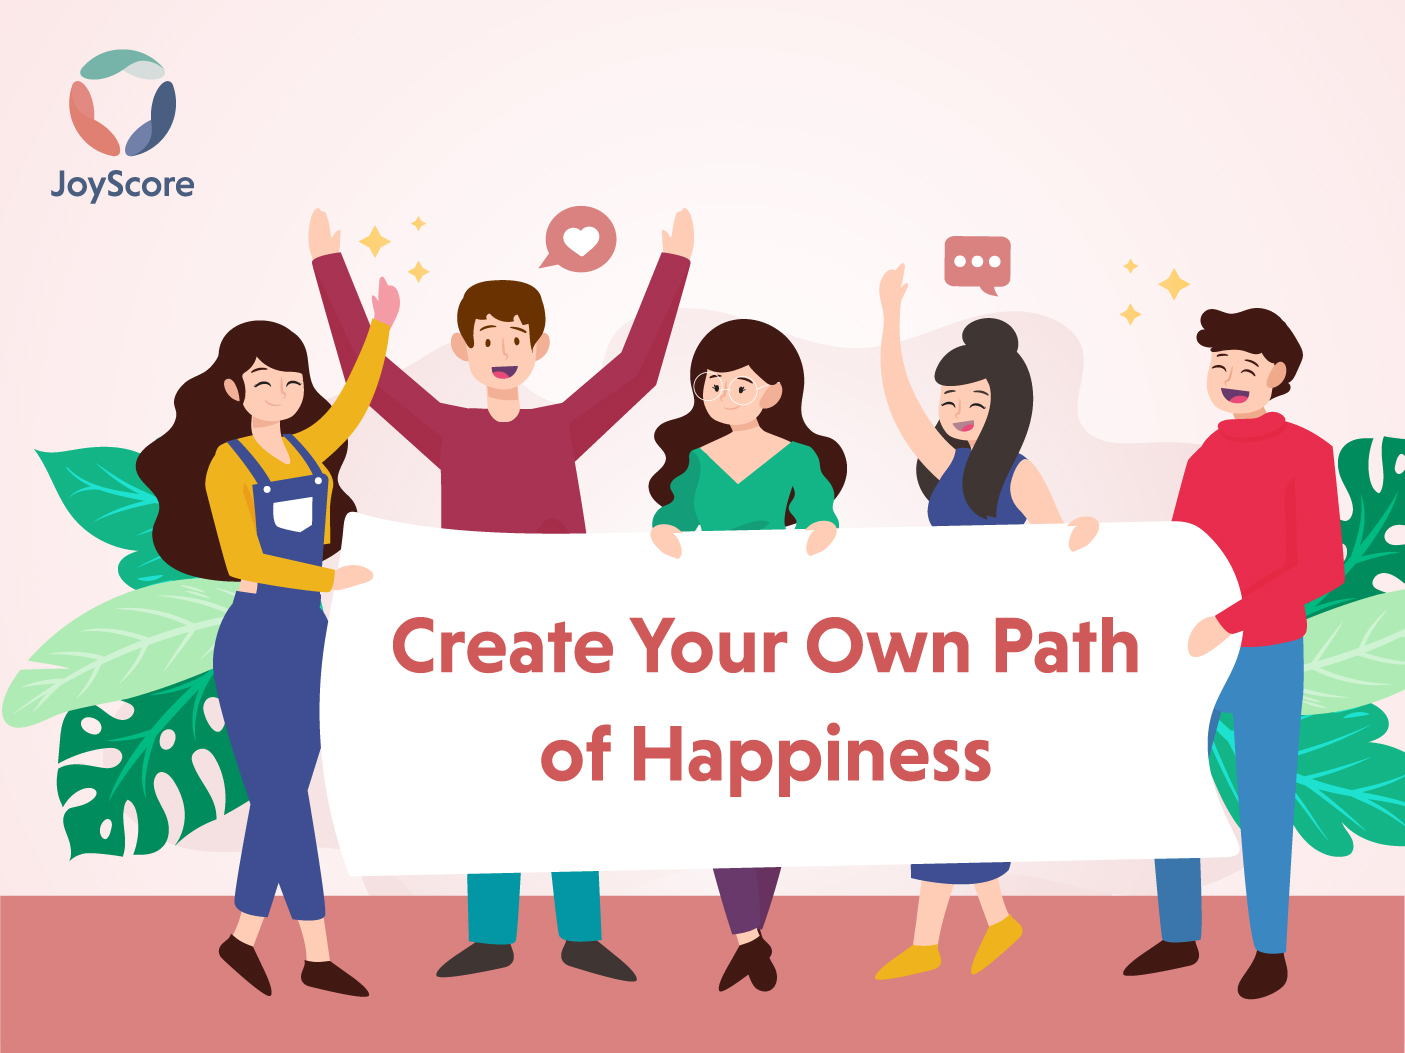 How to create your own path of happiness